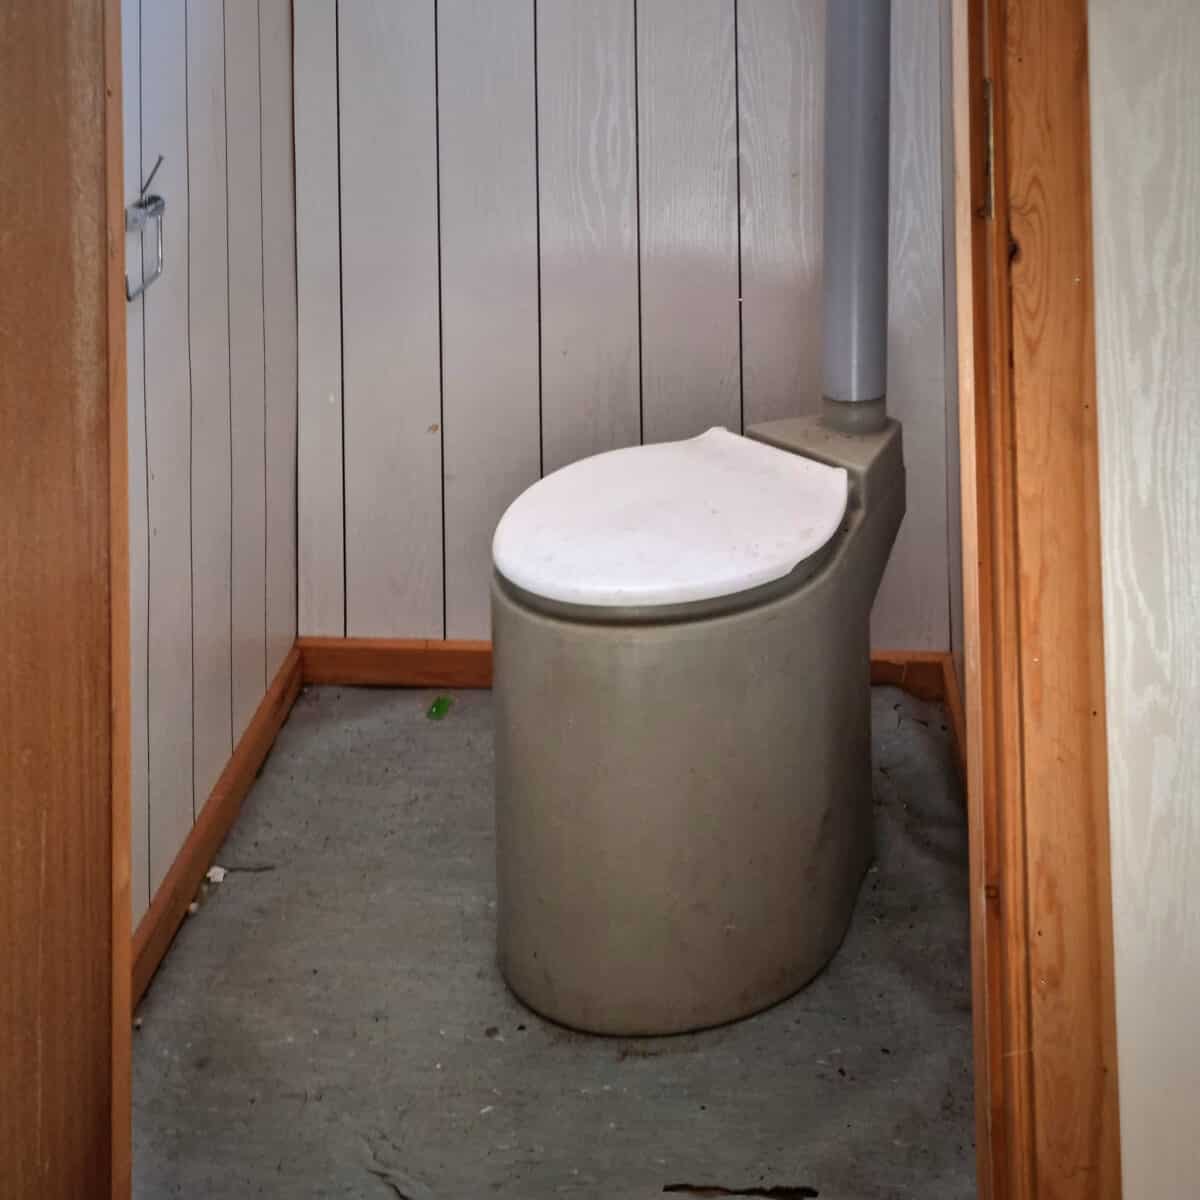 Indoor dry toilet at the Canoe Center